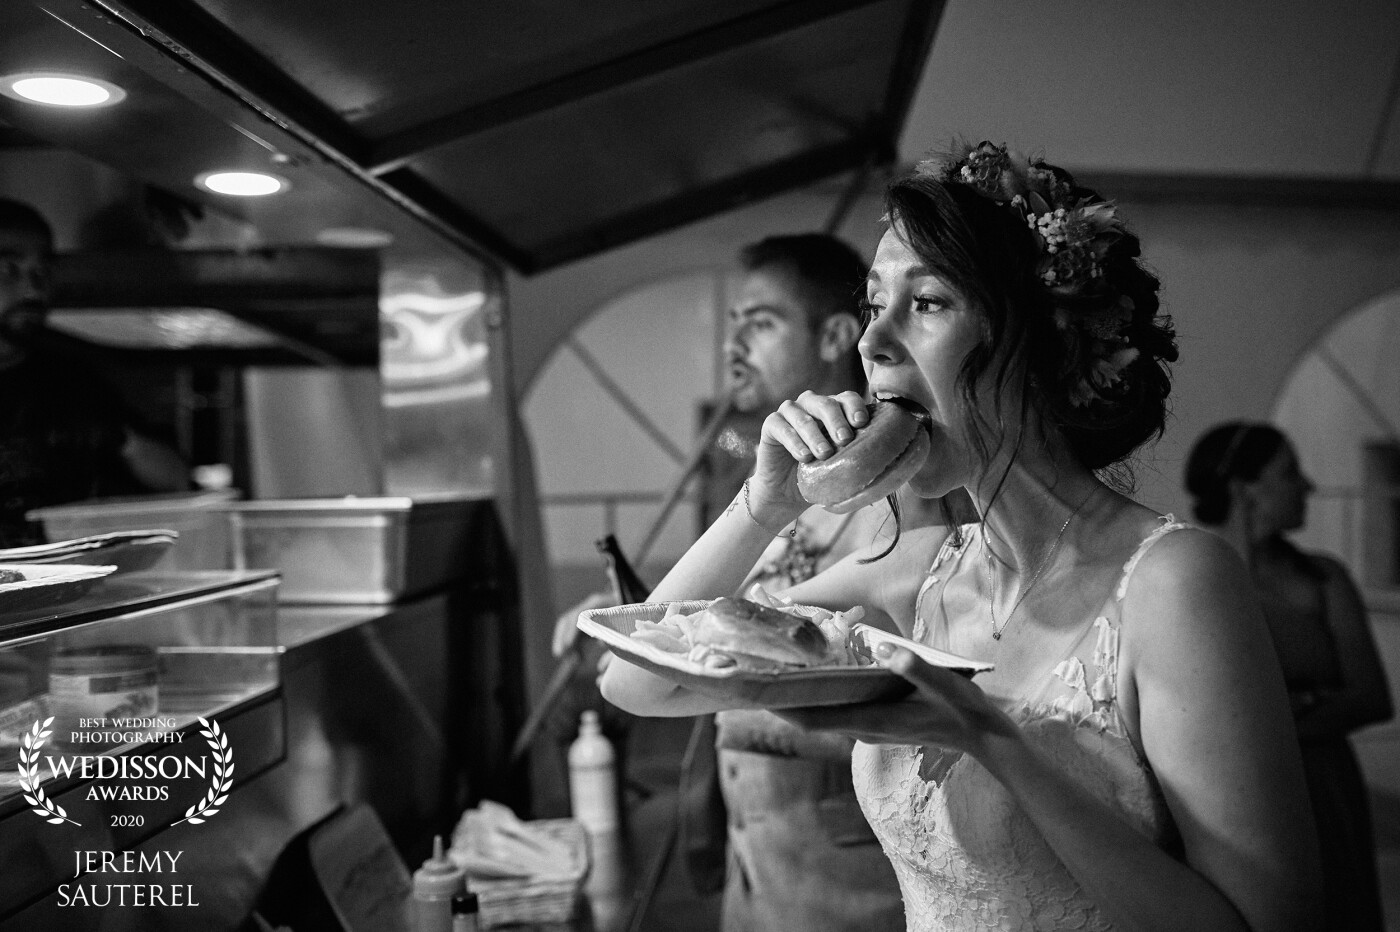 The bride and groom had planned a Food Truck evening for their wedding meal. The bride was very hungry and did not resist long before eating her burger.